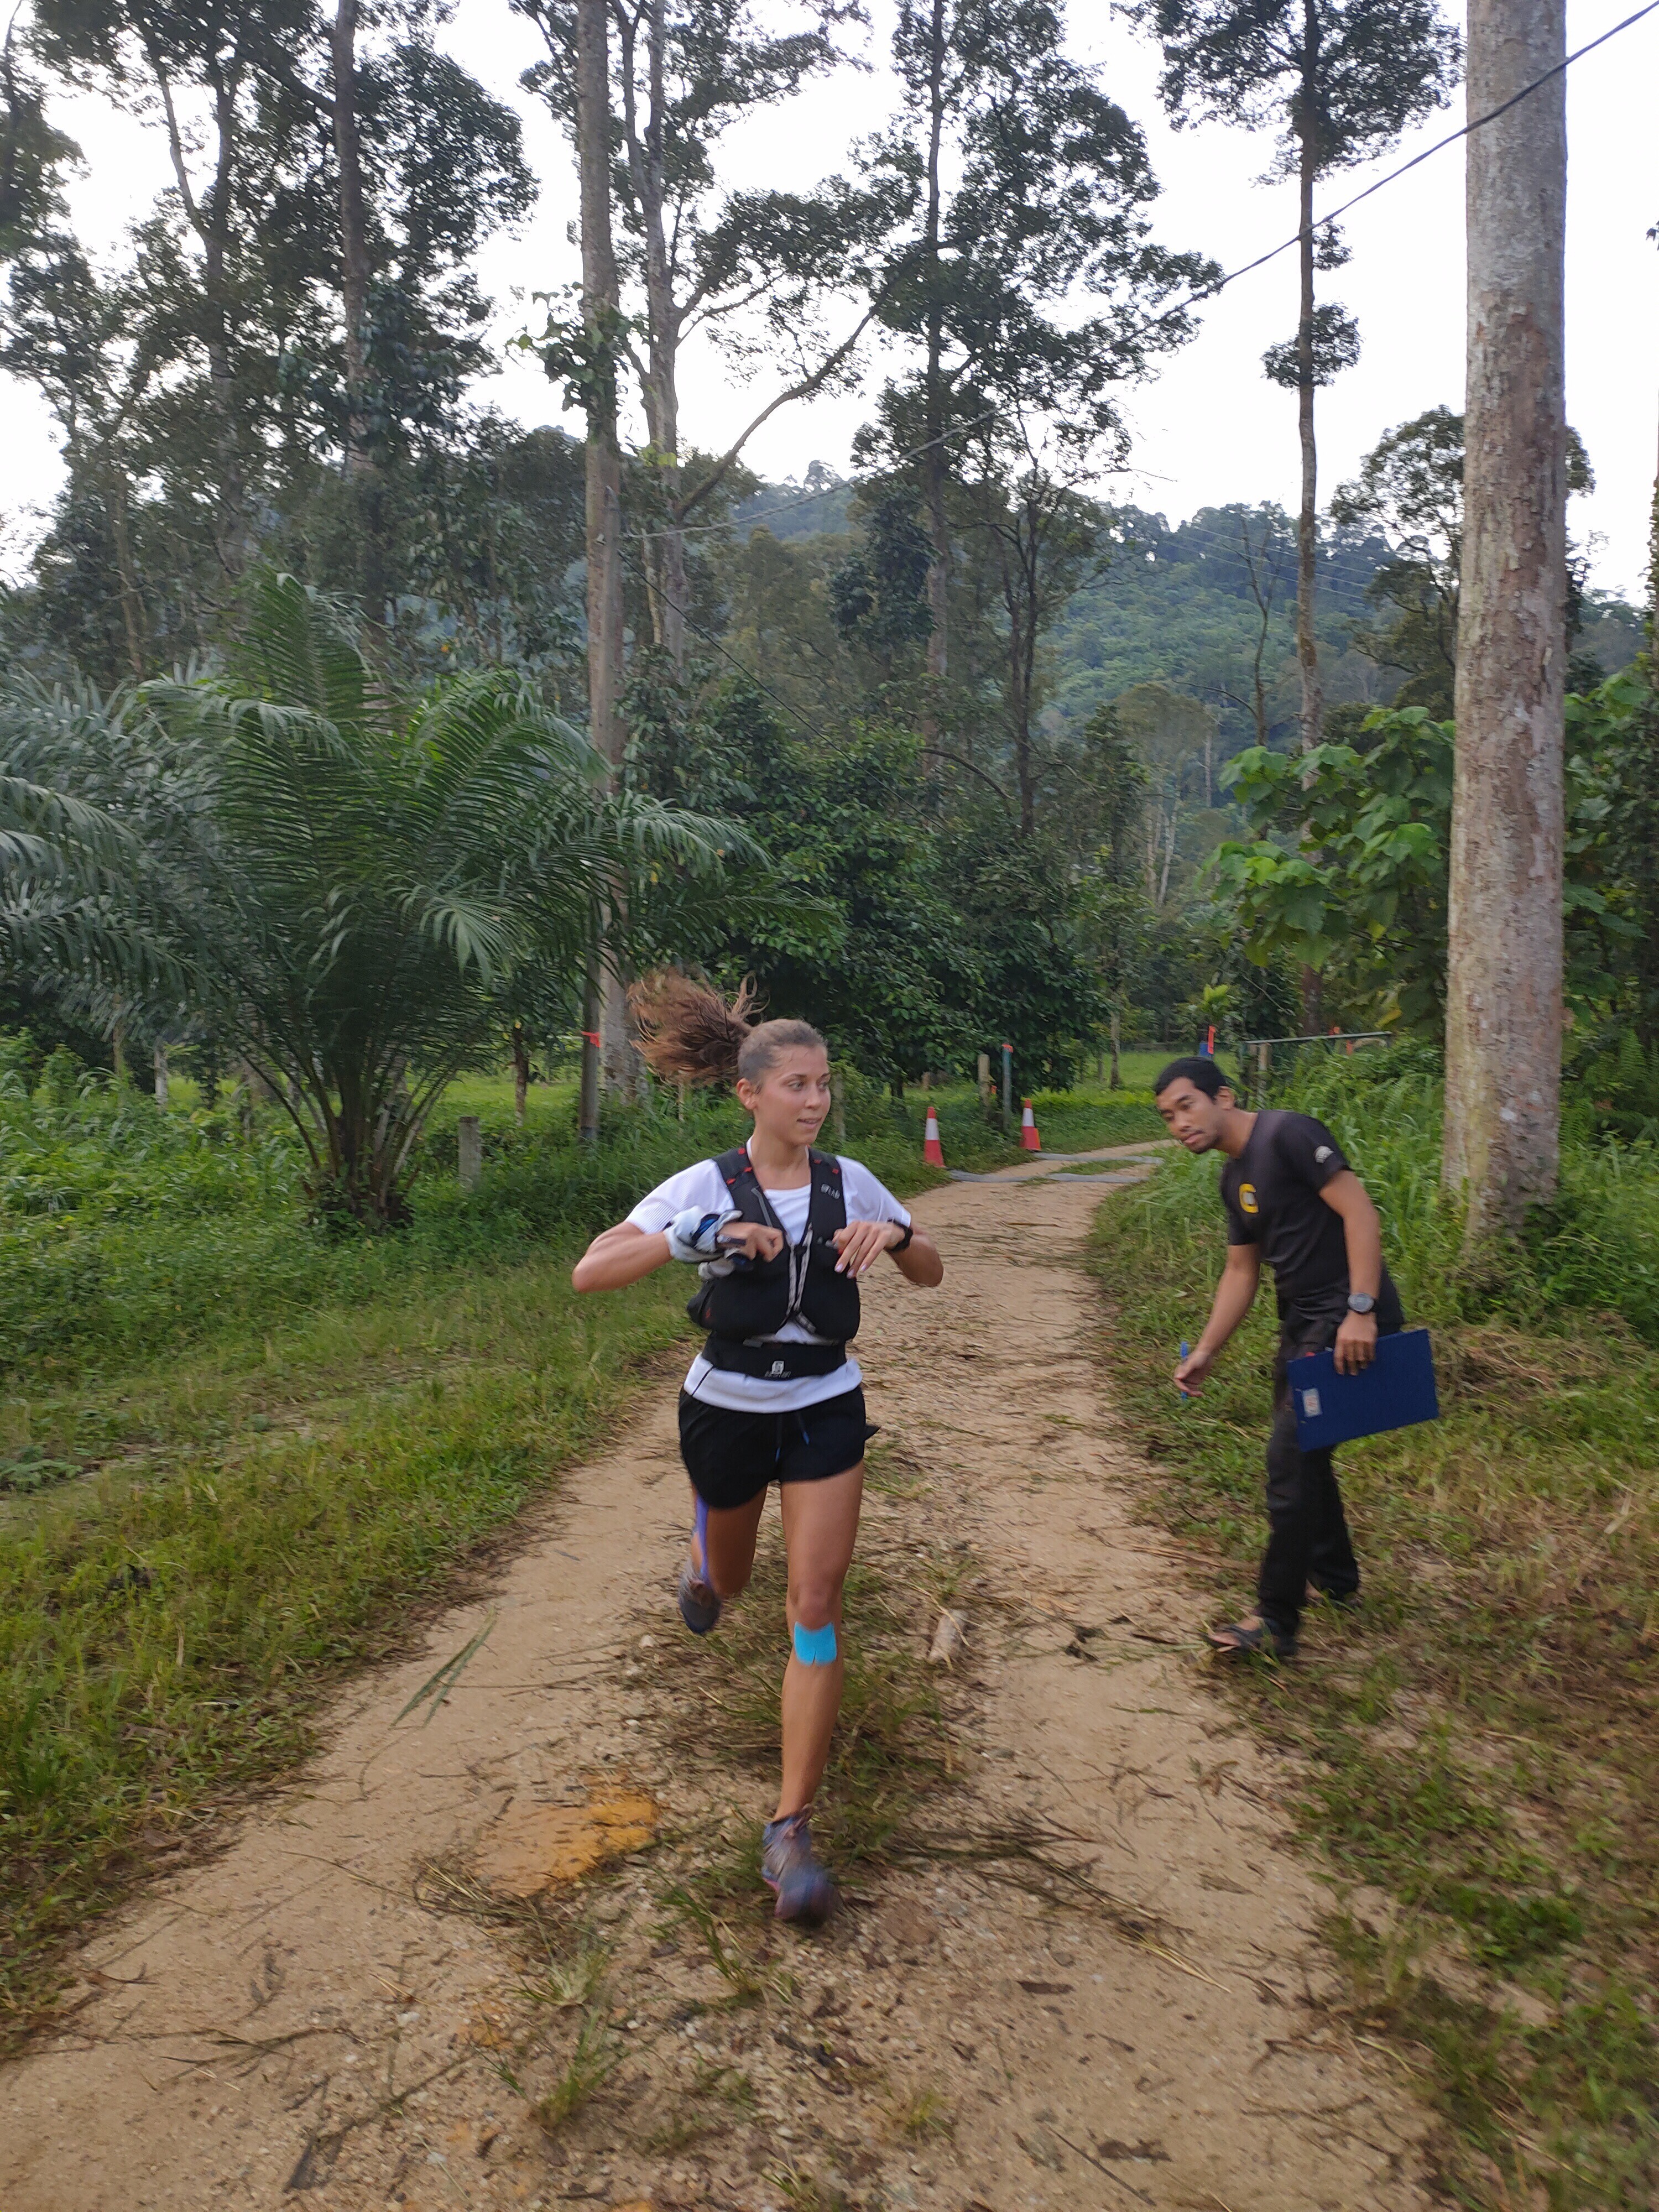 Veronika Vadovicova, winner of the Asia Trail Master 2019, has started a community called Asia Trail Girls. Photo: ITR Run